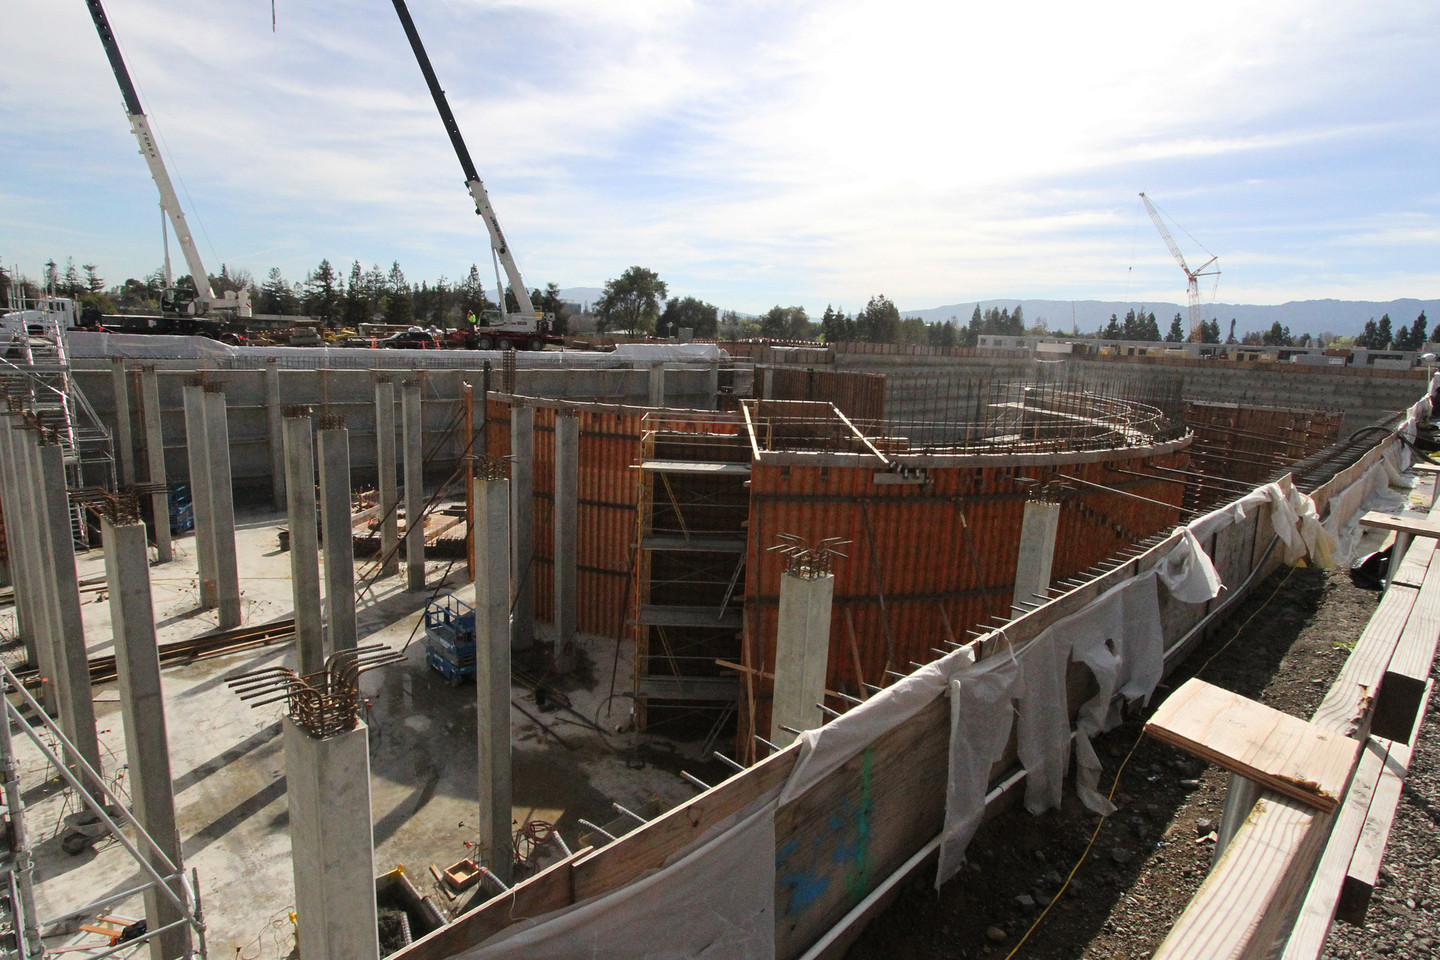 Adjacent to the circular office space, Apple is constructing an amphitheater. (Anya Schultz/KQED)